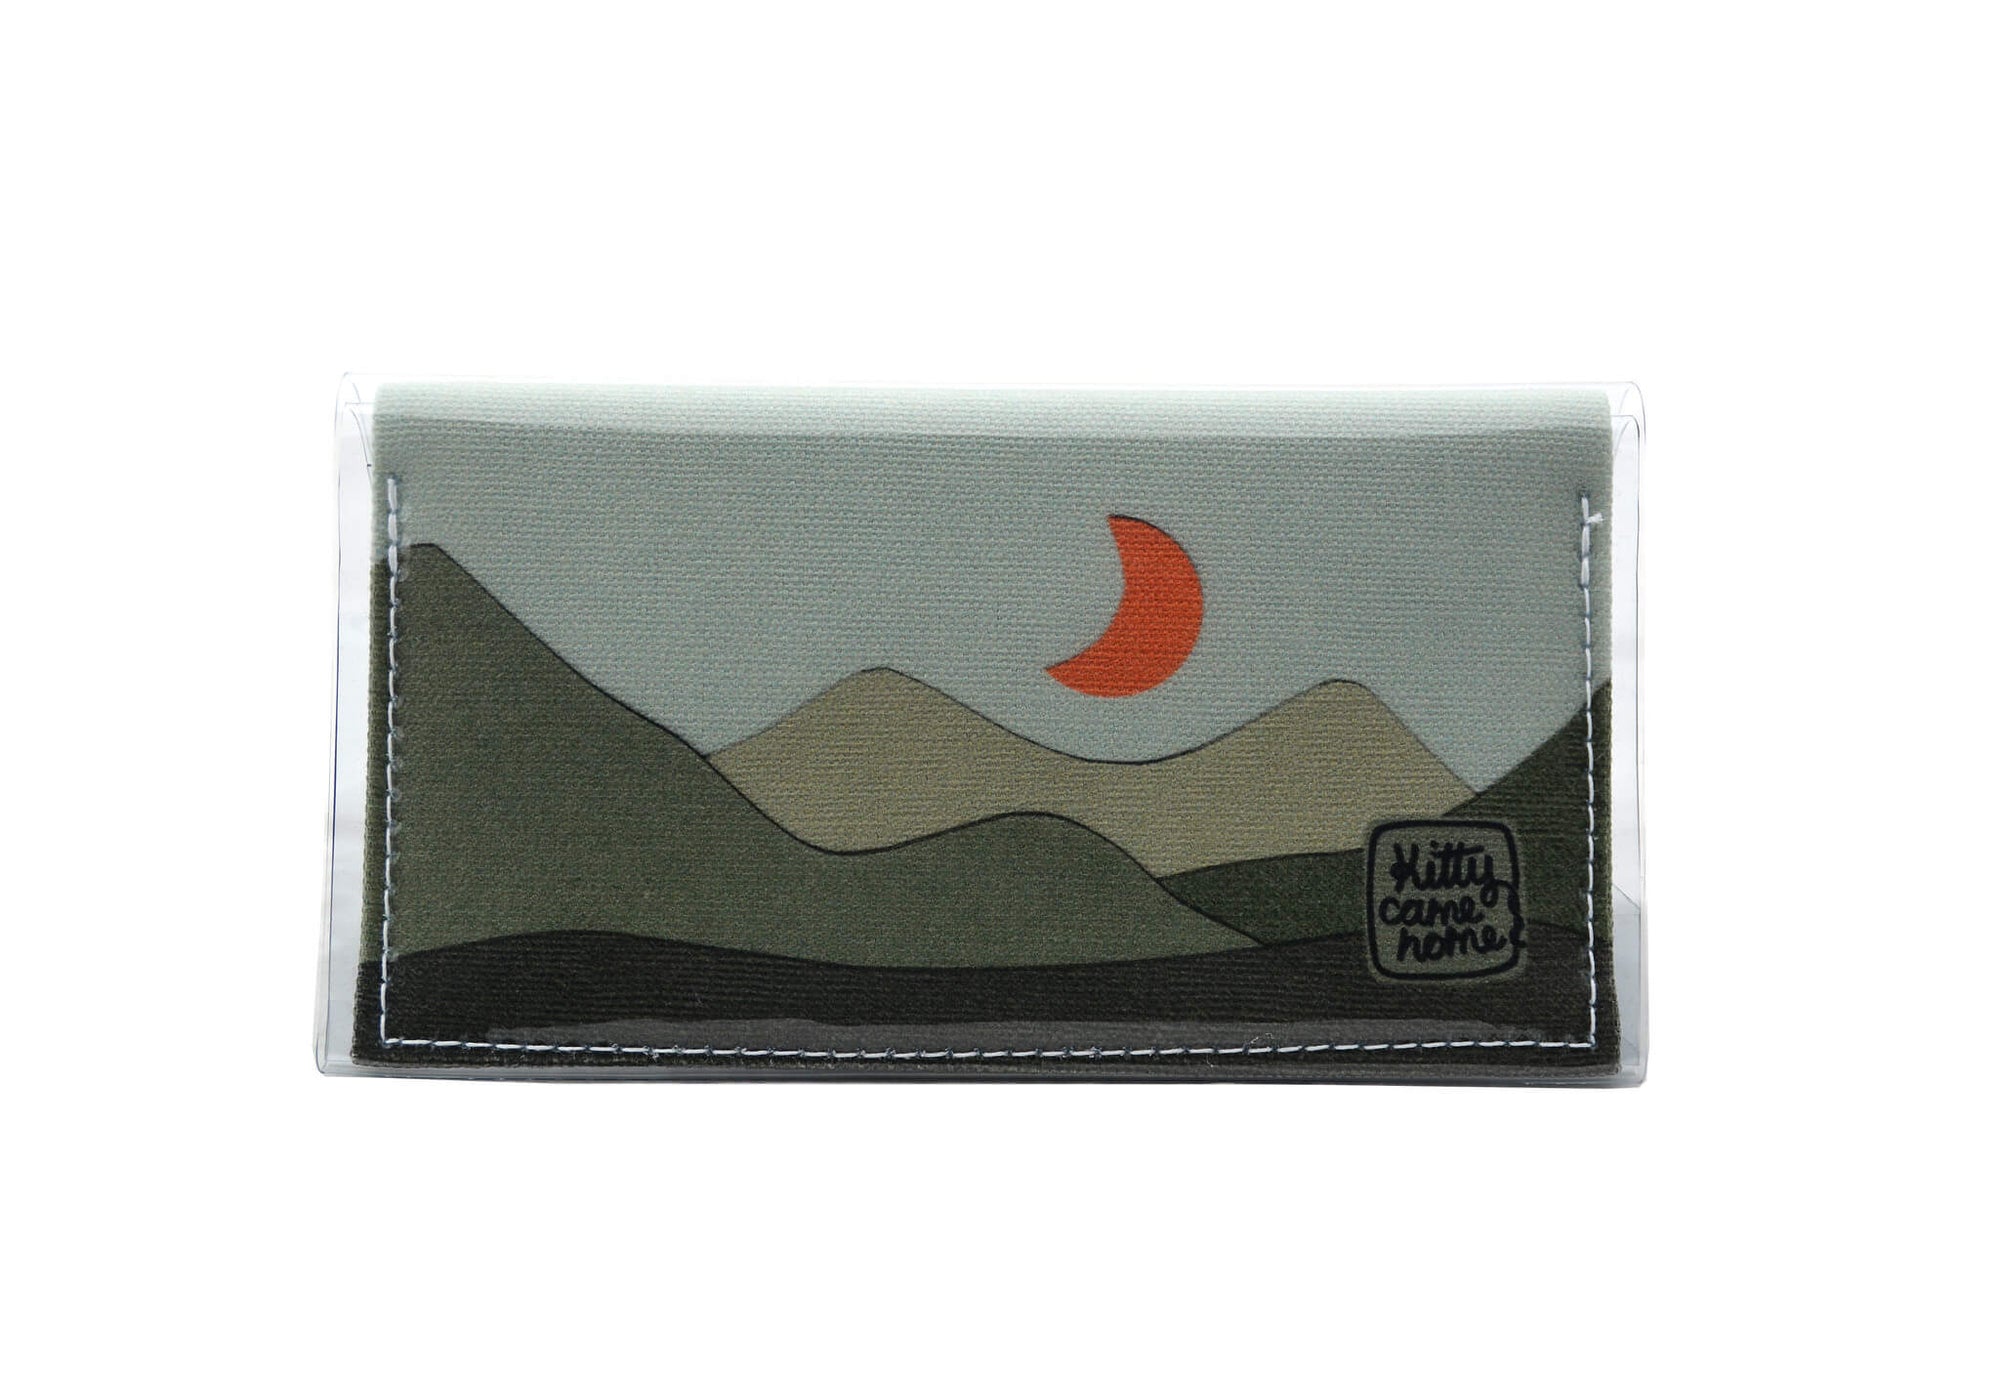 This is an image of the front of a Kitty Came Home bifold mini purse clutch in the 'Moondance' design by Satin and Tat. An orange crescent moon floats above a landscape of dark green hills. This is the small size.